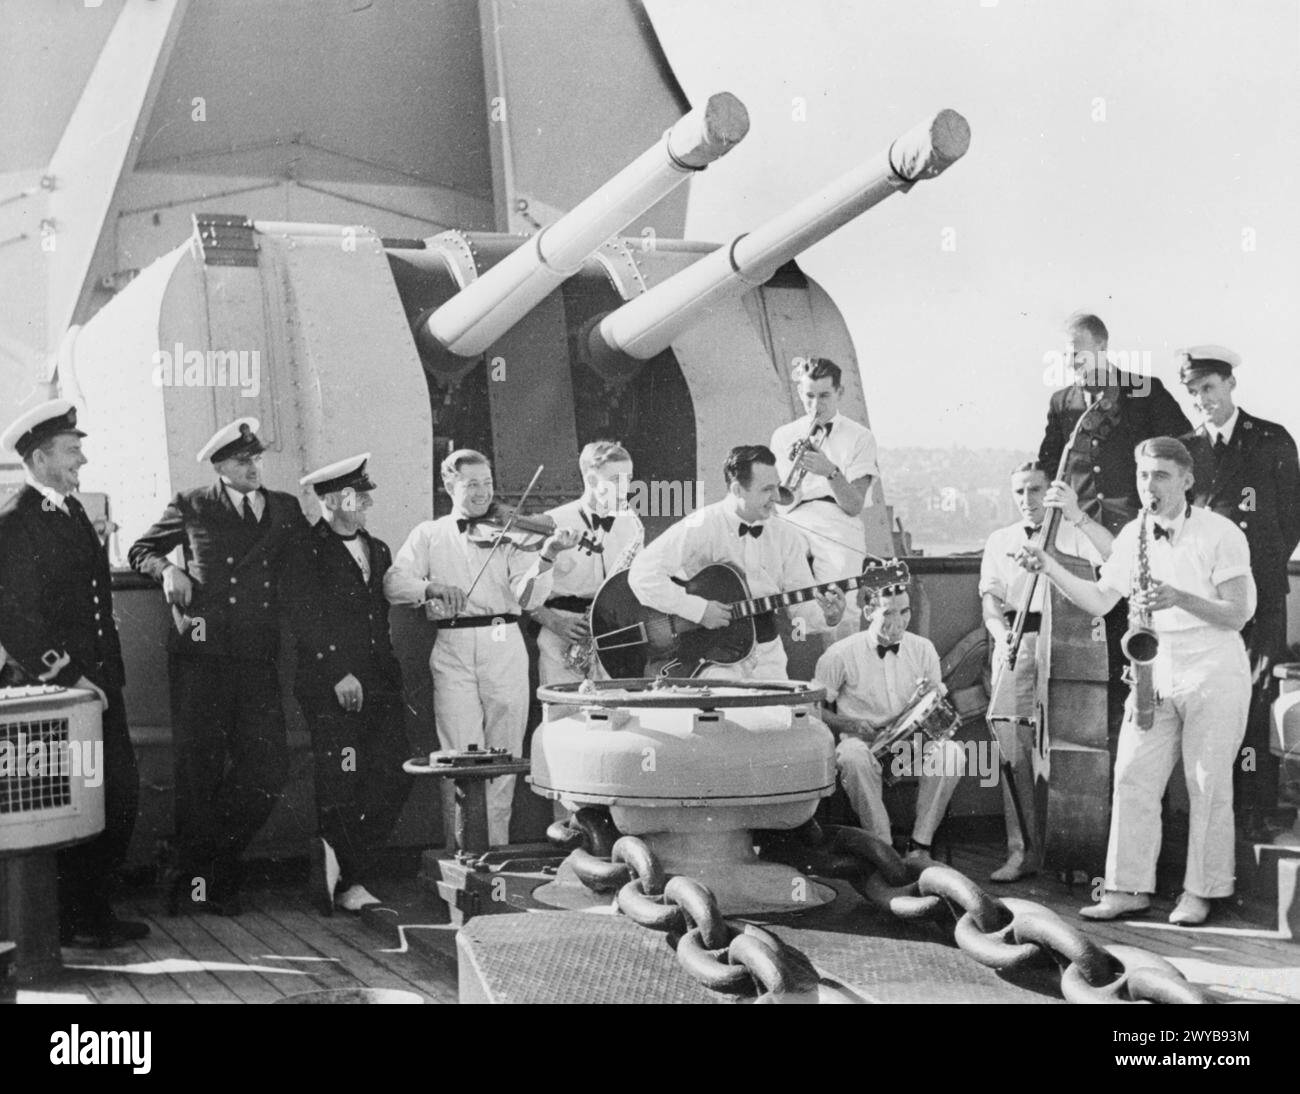 SERVING AGAINST THE JAPANESE. AUGUST 1945, PICTURES AND CARICATURES OF MEN ON BOARD THE SHIPS IN WHICH THEY SERVE IN THE FAR EAST. - Lymington Naval officer entertains Pacific Fleet. Left to right: Lieut (S) H W F Johnson, DSC, RNVR, Lymington, Hants, and Liverpool; Stoker P O K Imes, Portsmouth; Chief PTI M Watson, Portsmouth; Shipwright S Payne, Glasgow; ERA I S Finch, Maidstone; EMF Bedell, Shrewsbury; Sig C Cross, Grimsby; Leading Officers' Cook W Warwick; Leading Seaman J Church, London; Leading Supply Assistant J McKenzie, Glasgow; AB D Dougherty, Newcastle with saxophone; CE A A Riley, Stock Photo